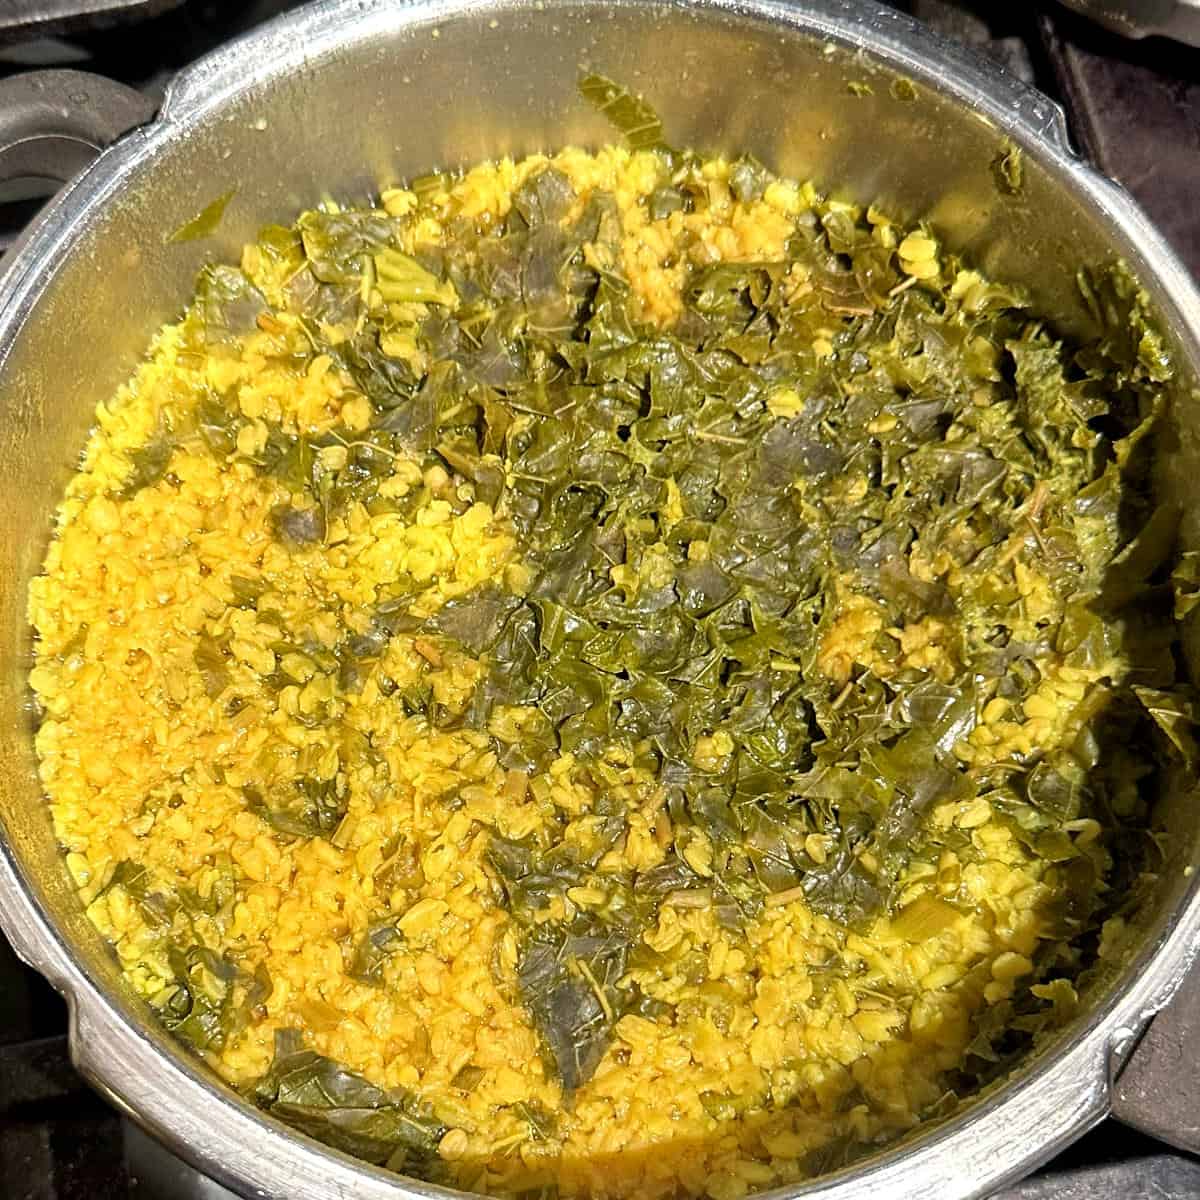 Cooked moong dal and amaranth leaves in pressure cooker pan.